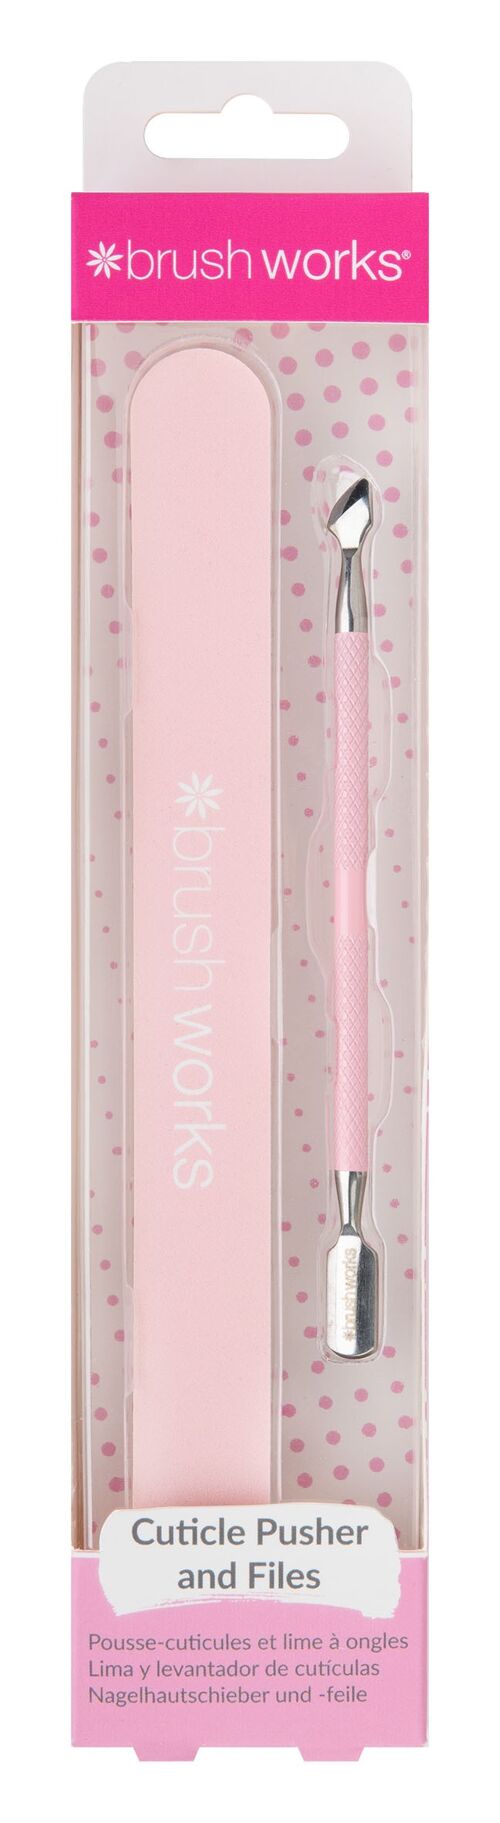 Brushworks Cuticle Pusher and Files